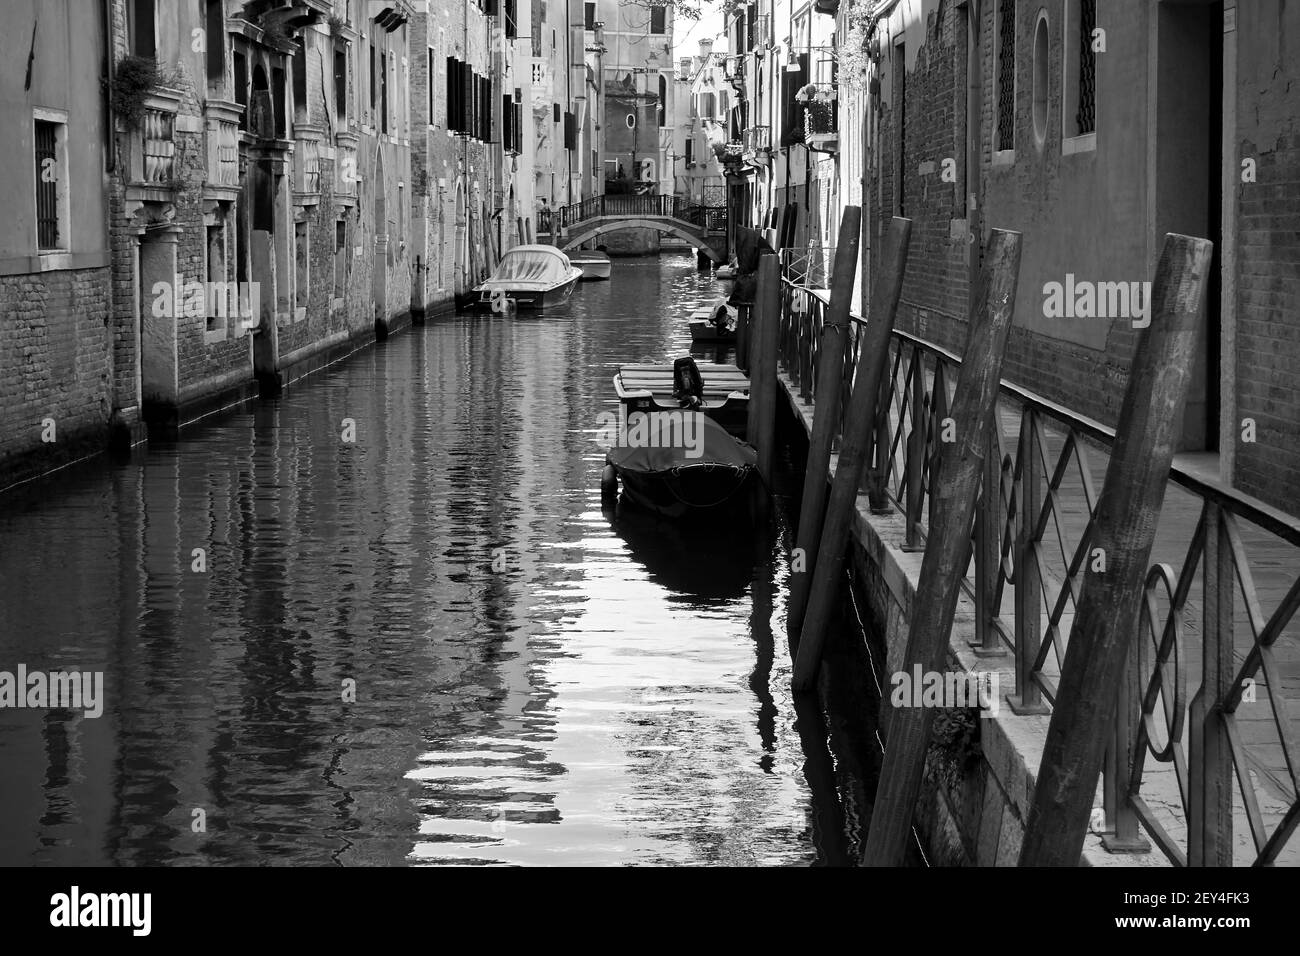 Perspective of a side canal in Venice, Italy. Black and white photography, venetian view Stock Photo